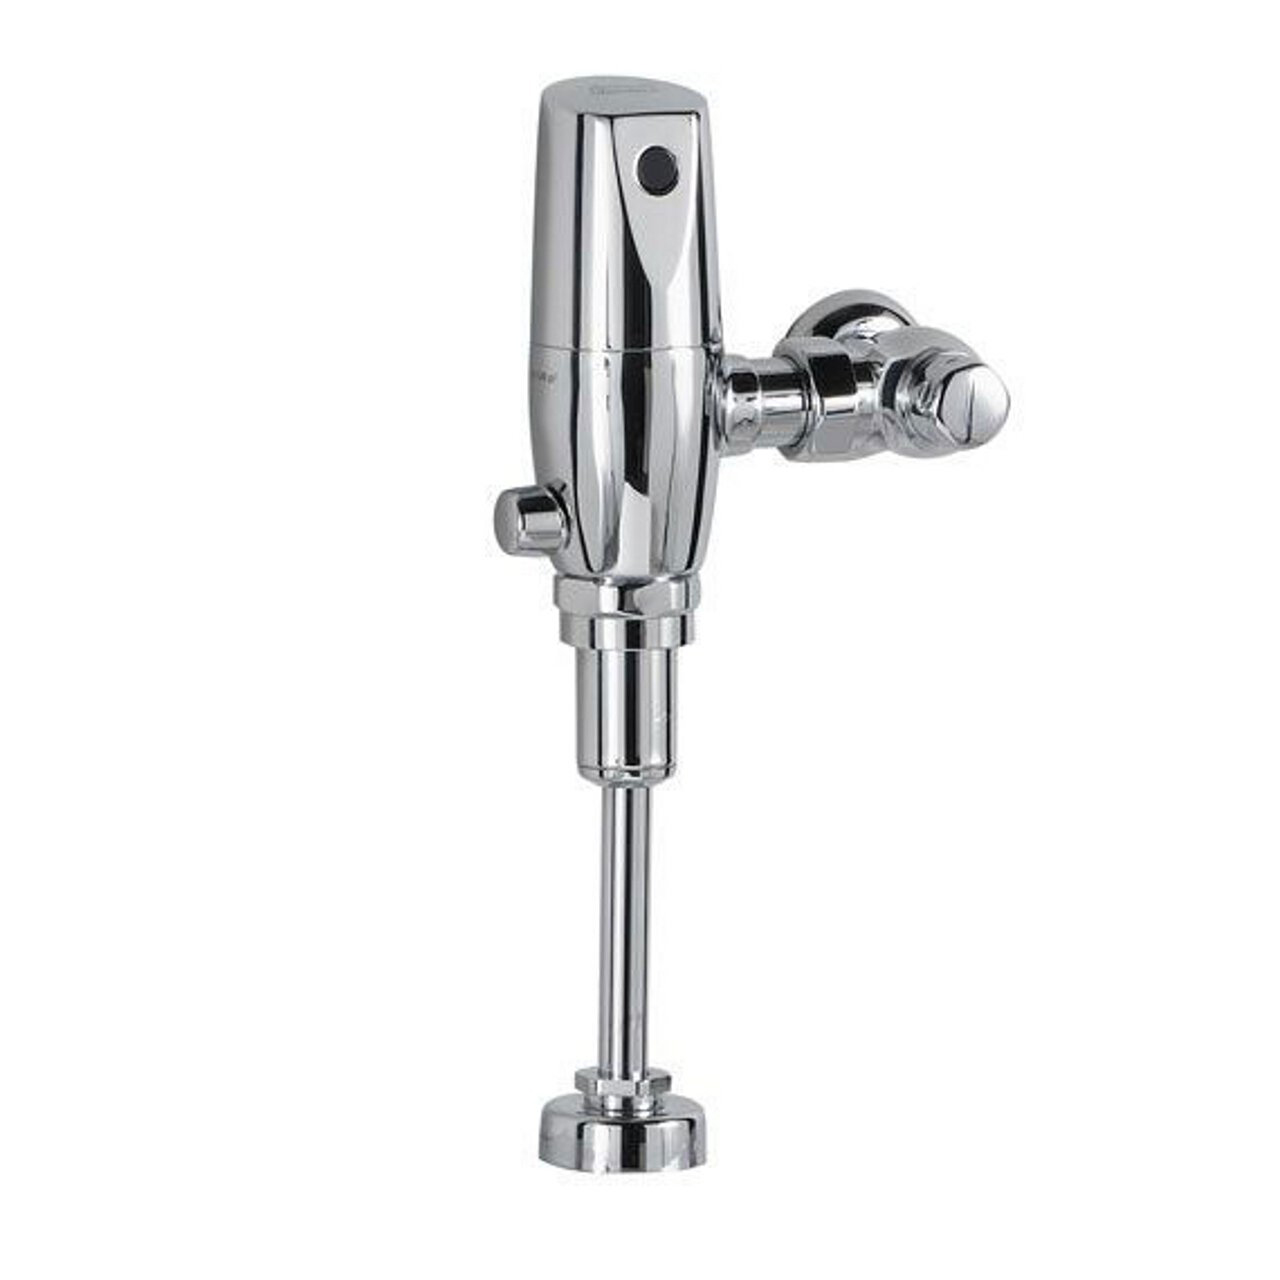 Selectronic Sensor-Operated Exposed Urinal Flush Valve for 3/4" Top Spud Urinals 0.5 gpf